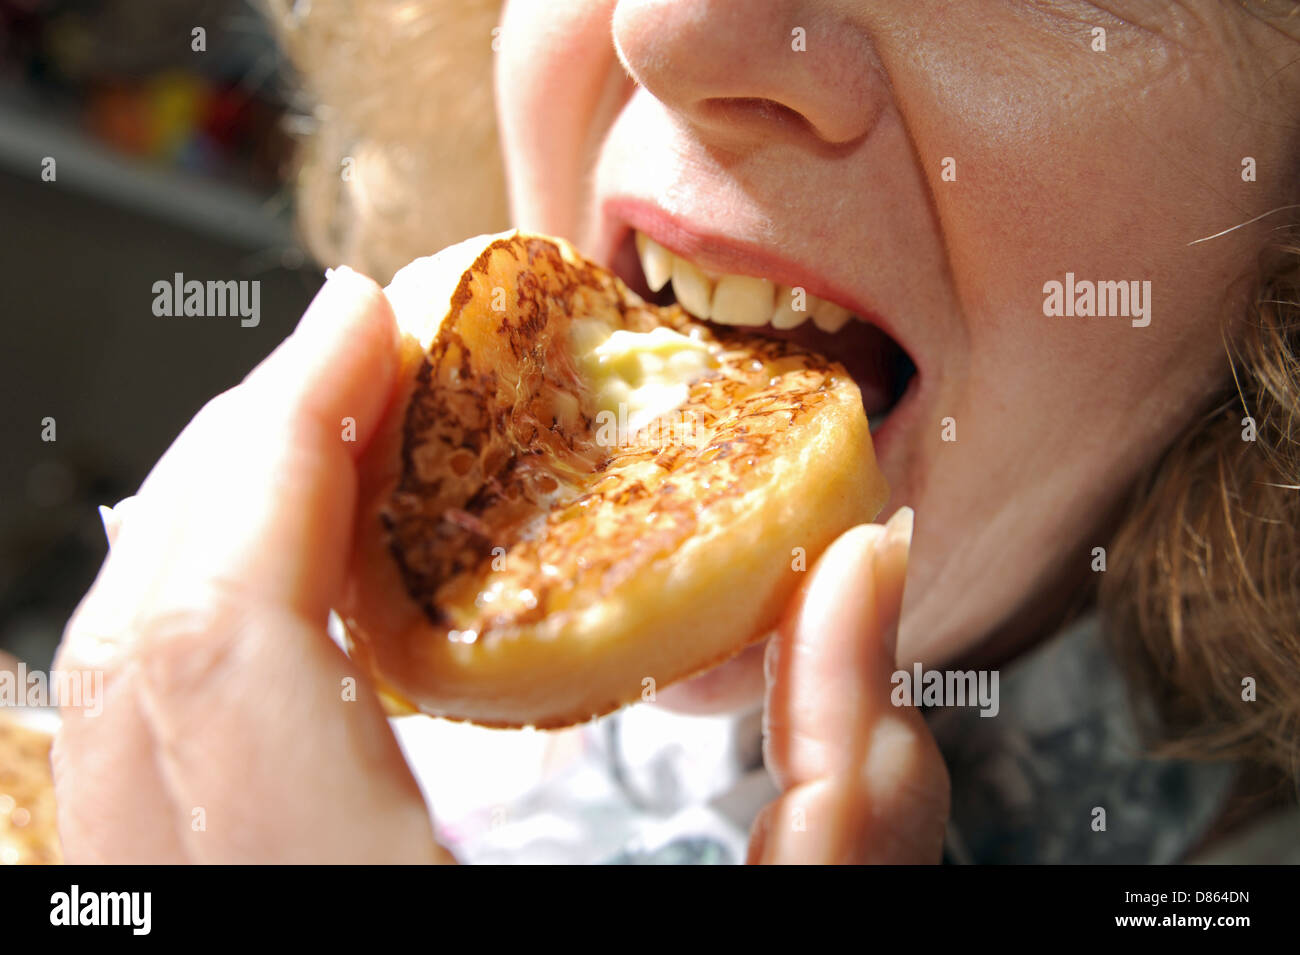 Woman enjoying eating a hot buttered crumpet for breakfast or tea Stock Photo